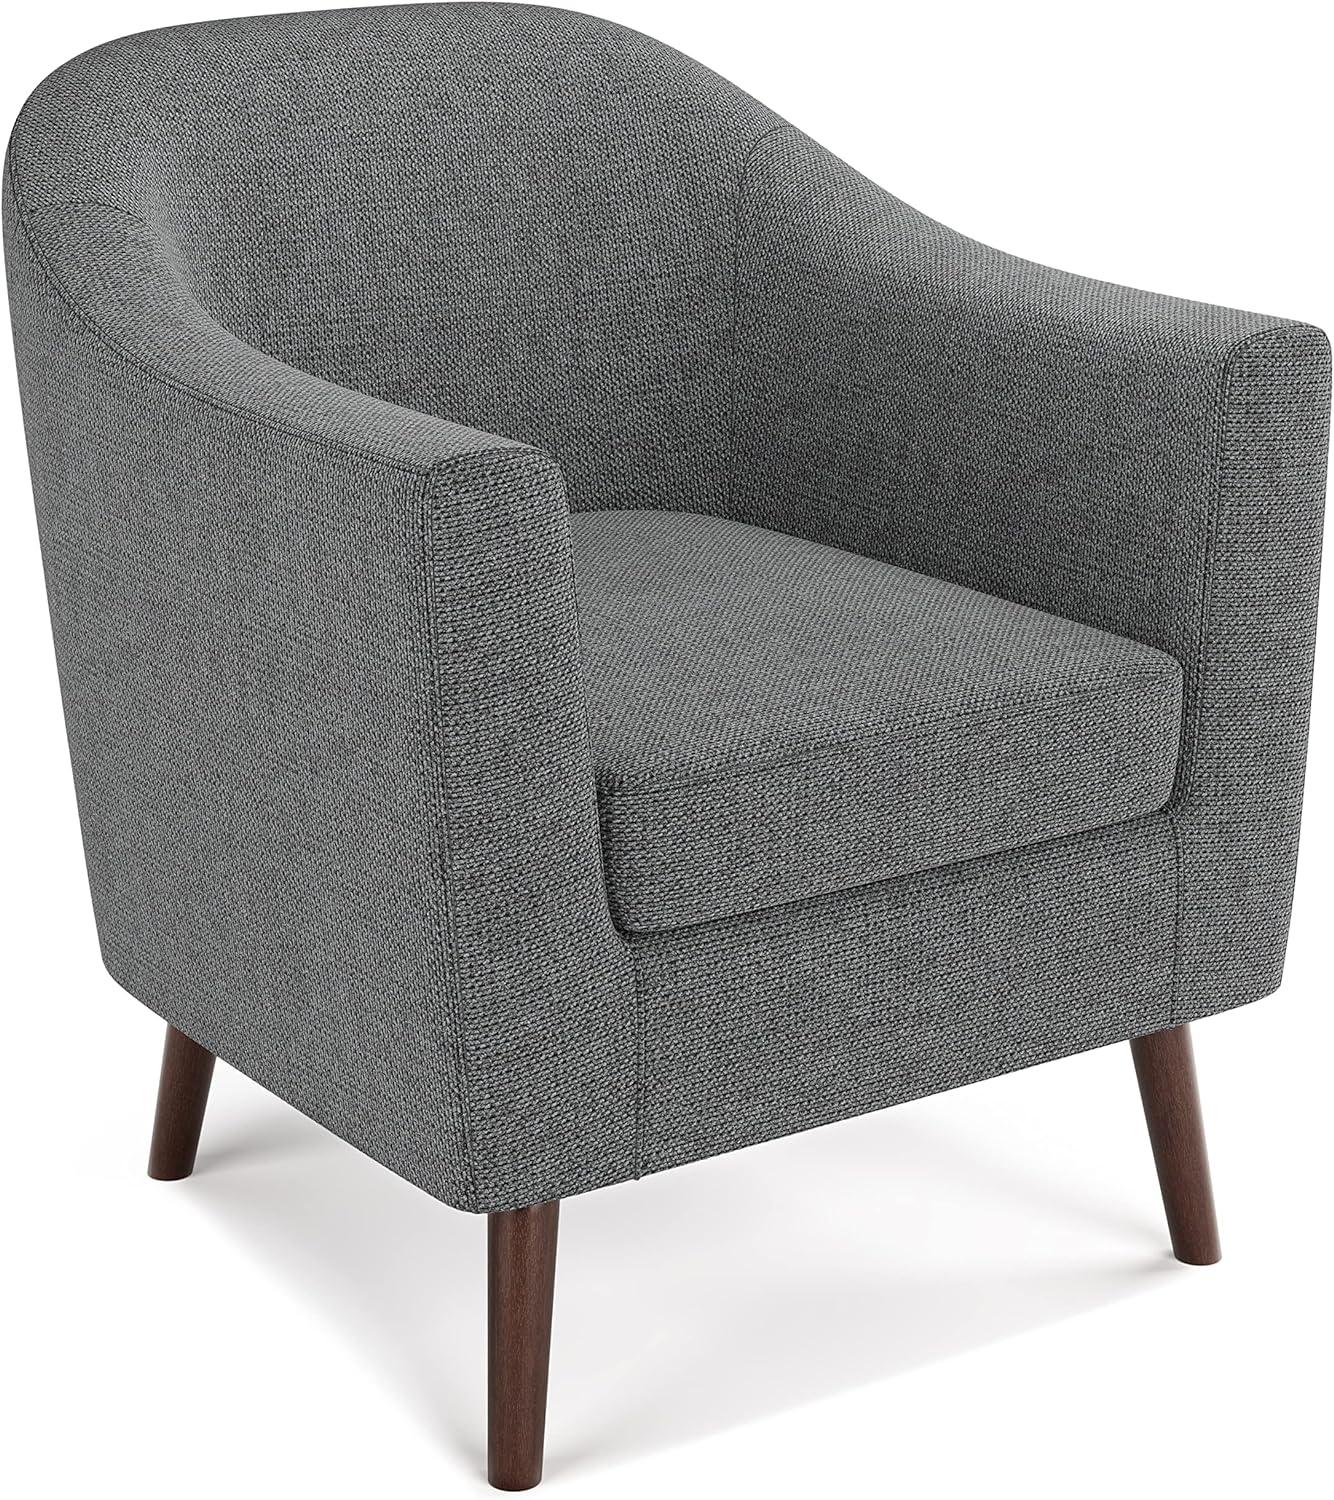 Transitional Shadow Grey Curved Accent Chair with Deep Seating